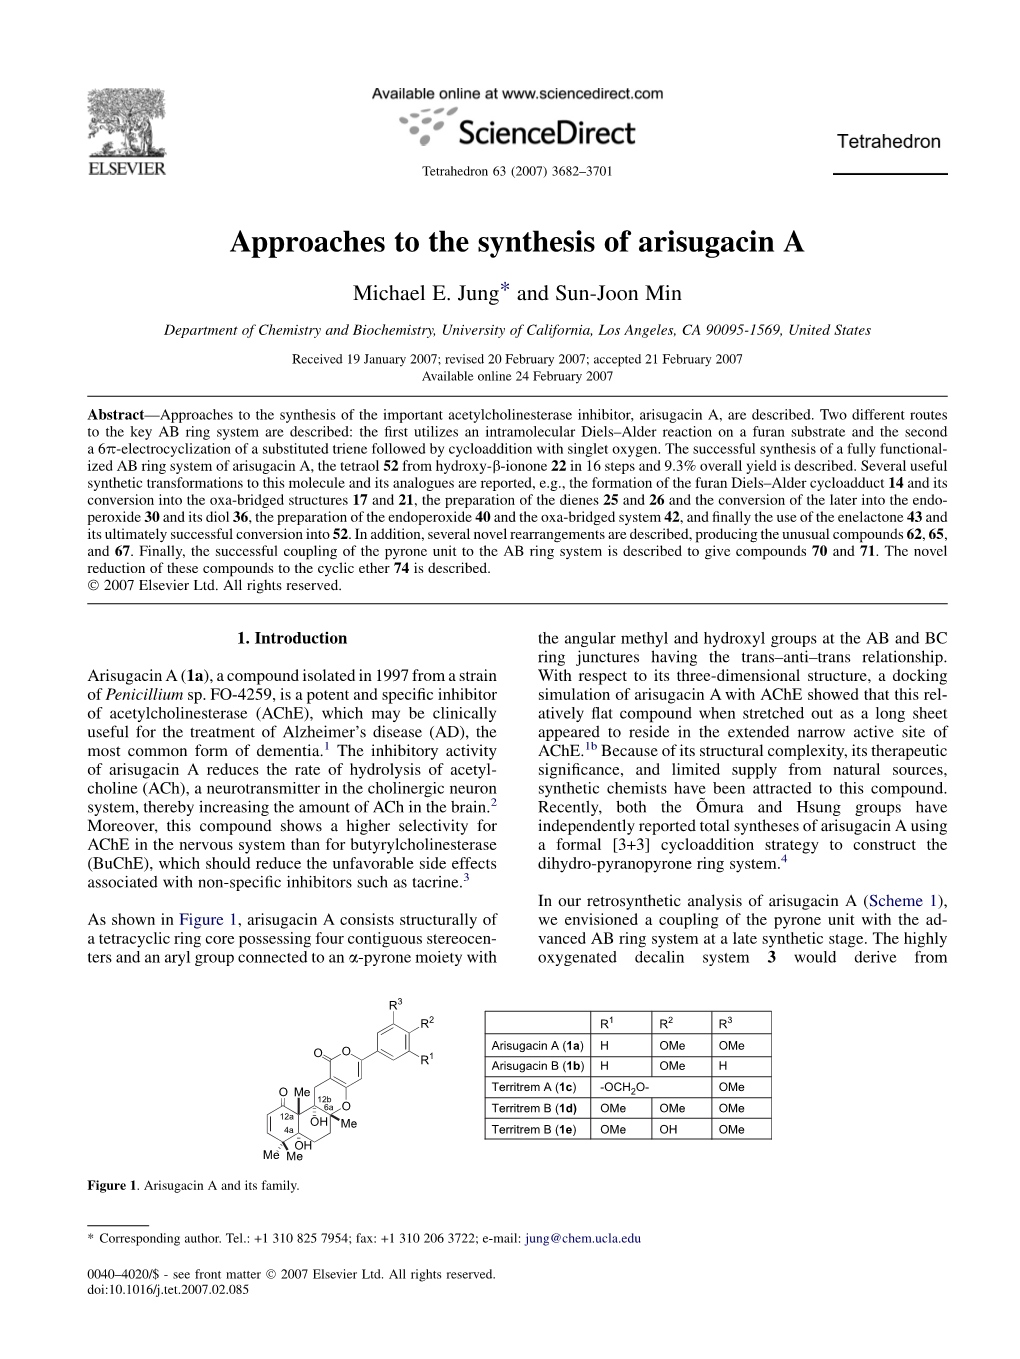 Approaches to the Synthesis of Arisugacin A